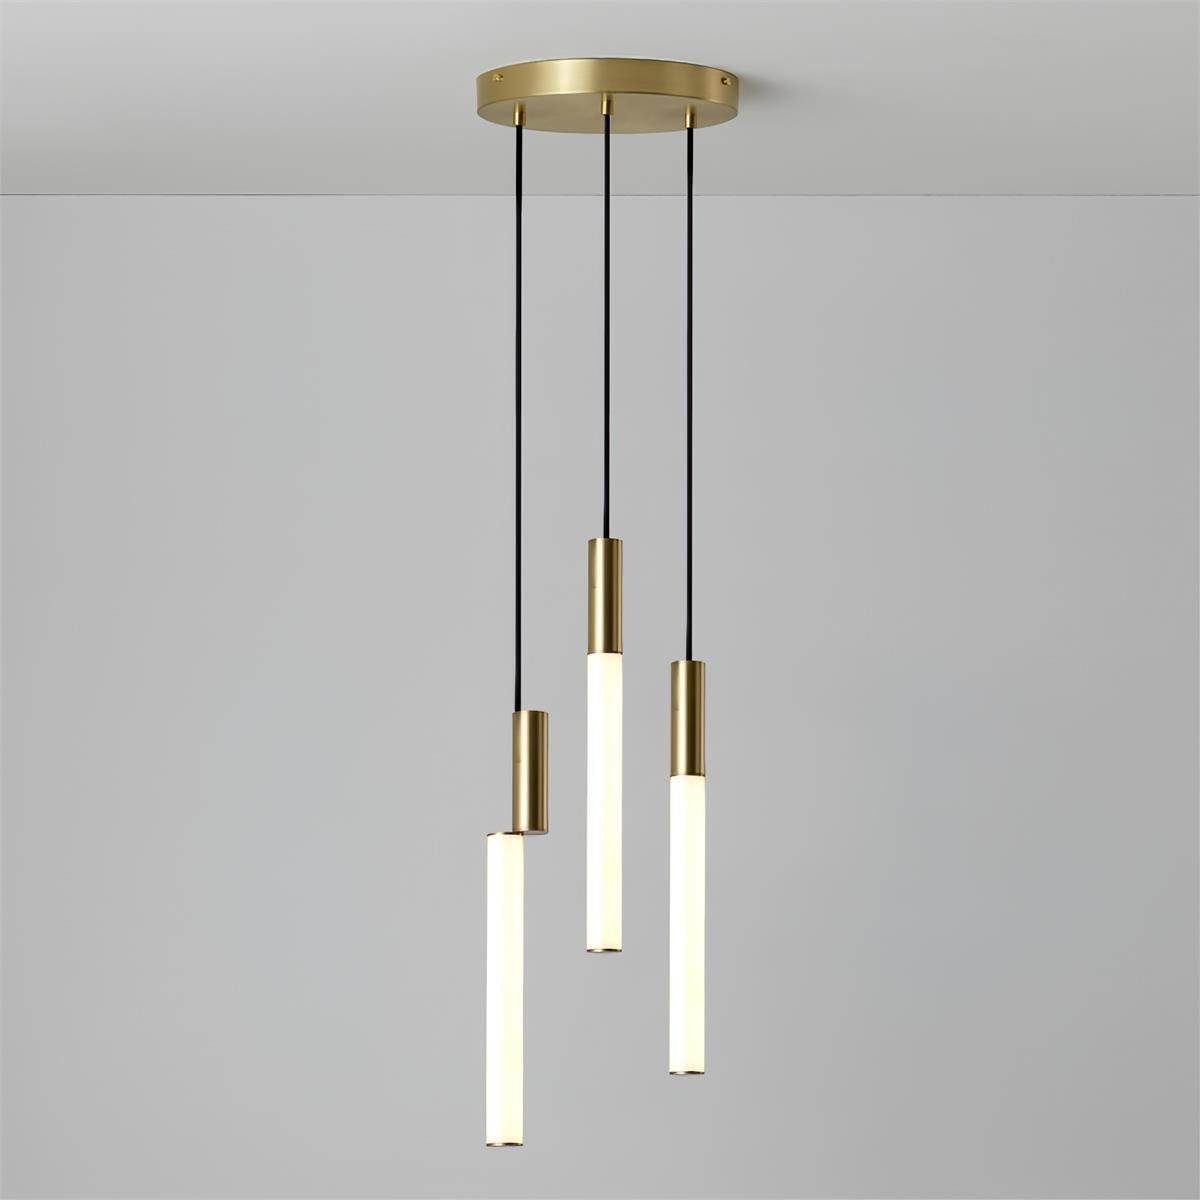 Gold and white LED pendant light with 3 heads, measuring 7.9 inches in diameter and 59 inches in height (20cm x 150cm), emitting a cool light.